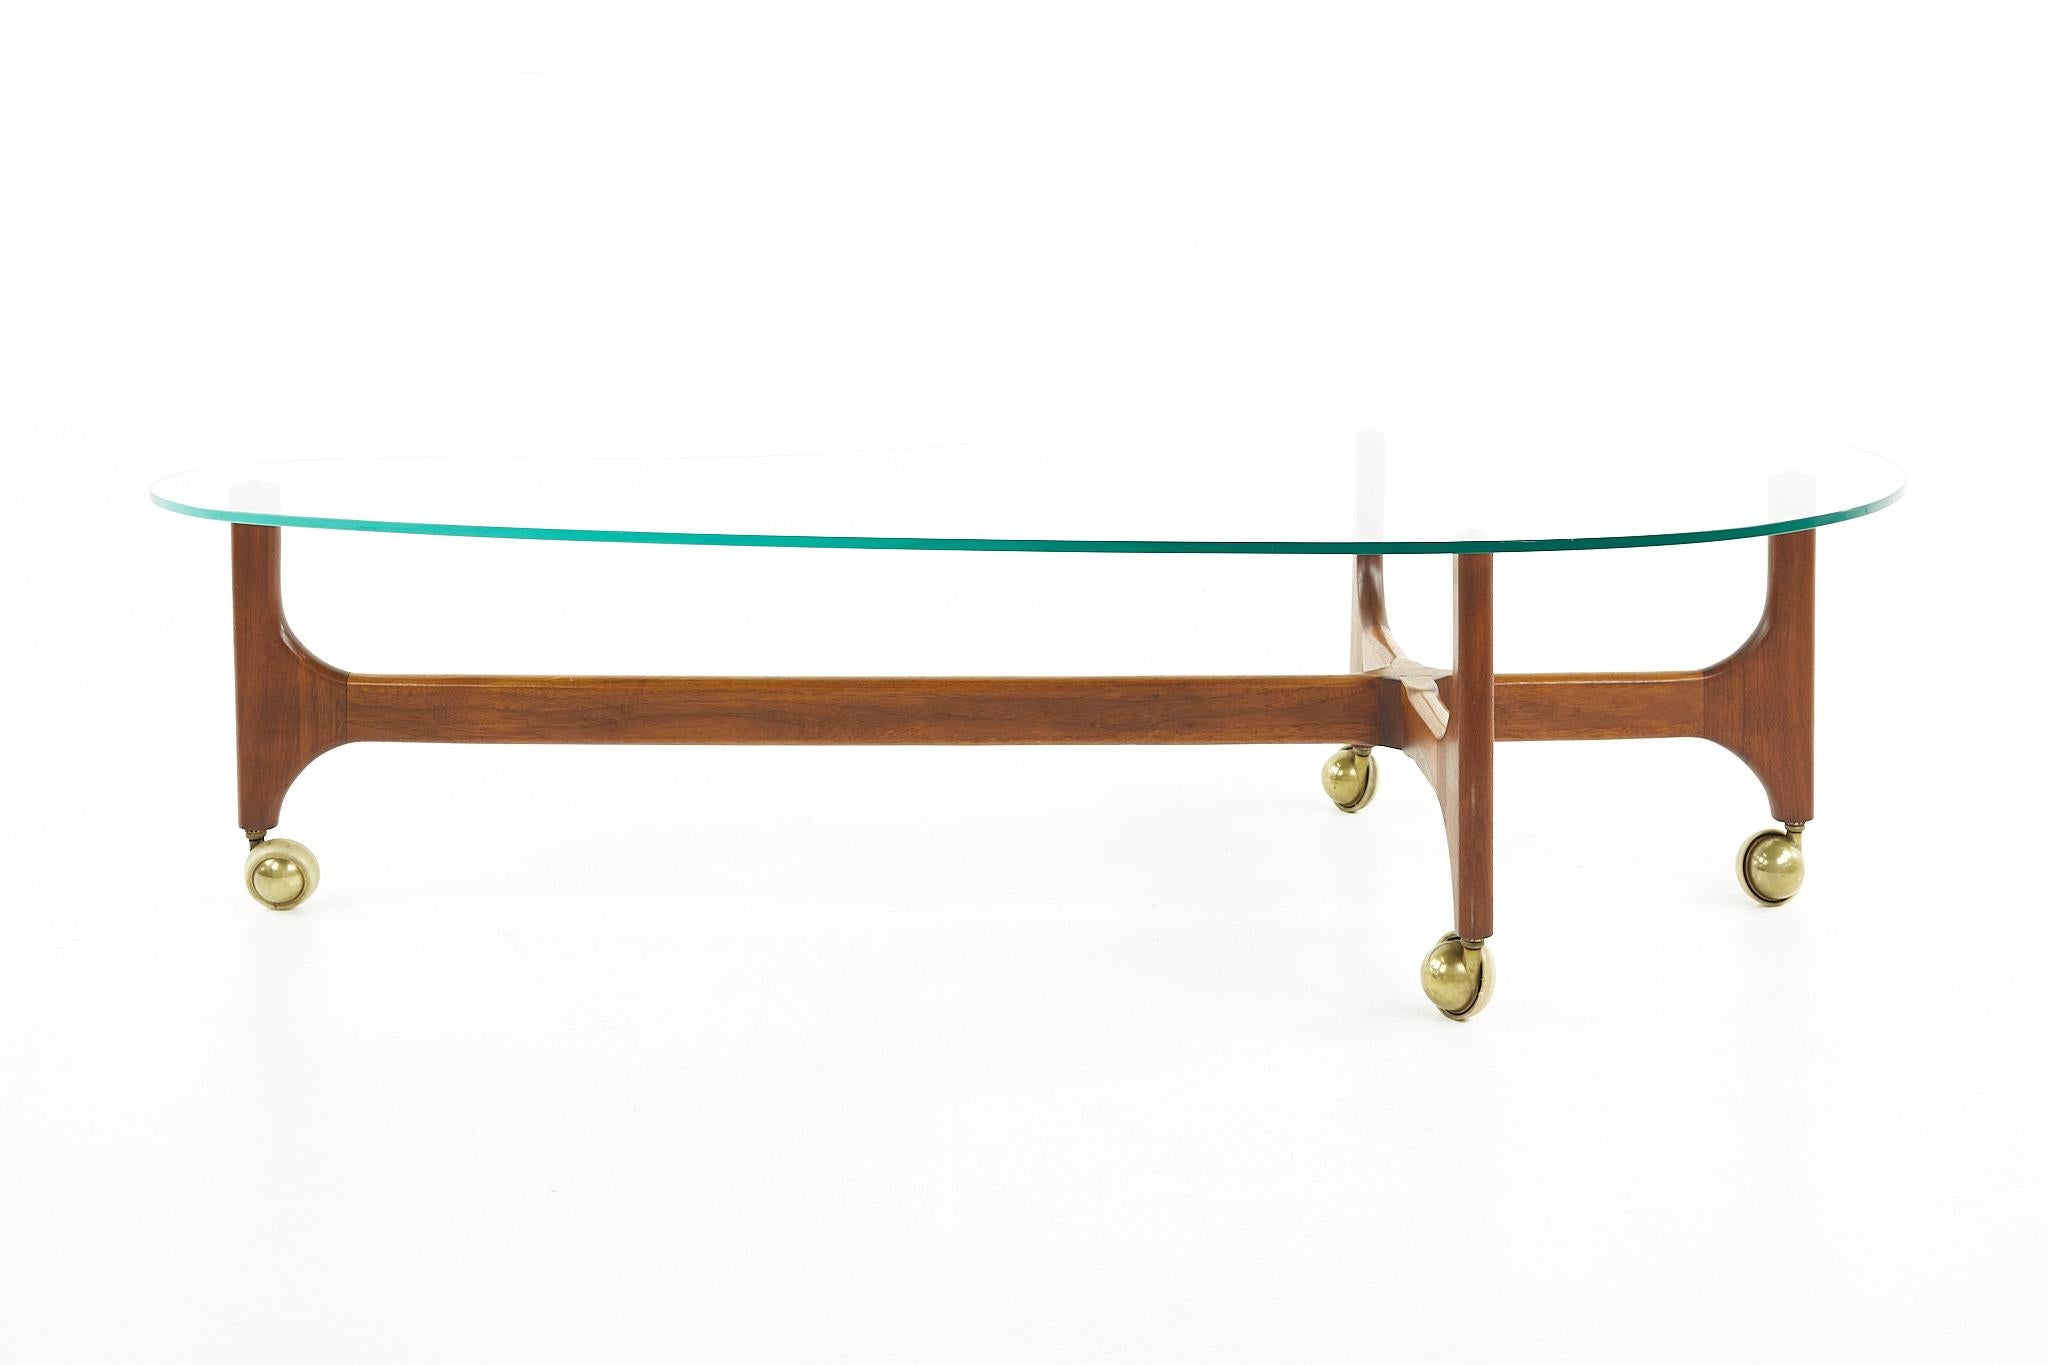 Adrian Pearsall style mid century walnut and brass biomorphic coffee table

The table measures: 60.5 wide x 28.25 deep x 15.5 inches high 

All pieces of furniture can be had in what we call restored vintage condition. That means the piece is